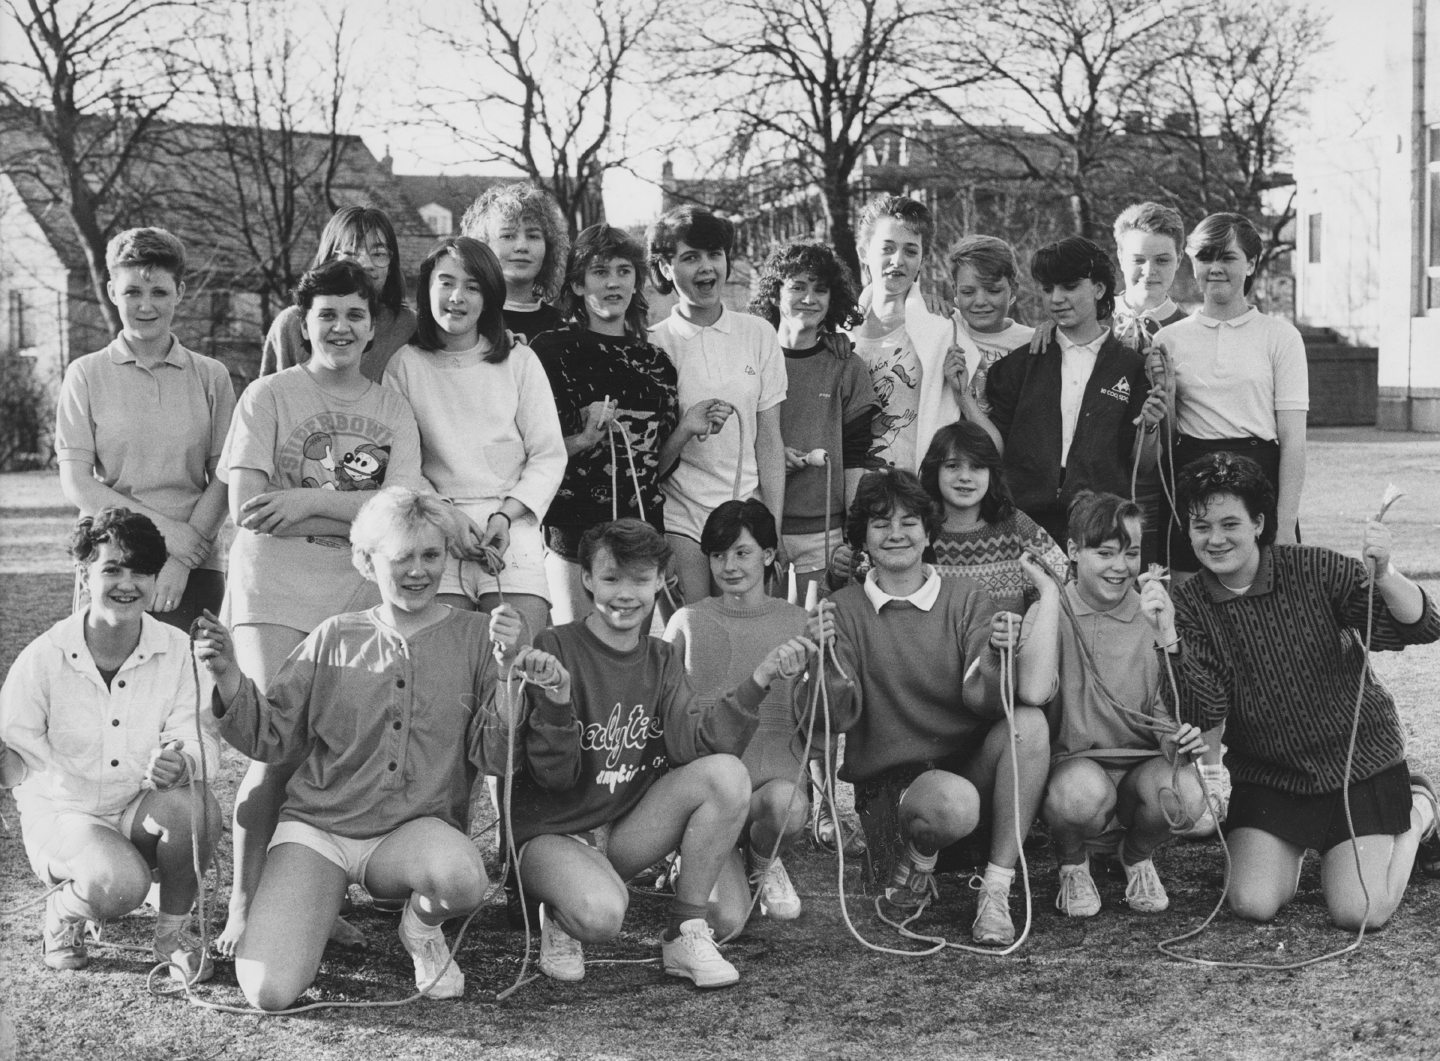 School pupils who took part in a sponsored skipping marathon to raise cash for Aberdeen Royal Infirmary's renal dialysis unit where schoolmate Michelle Forbes received treatment in 1986.